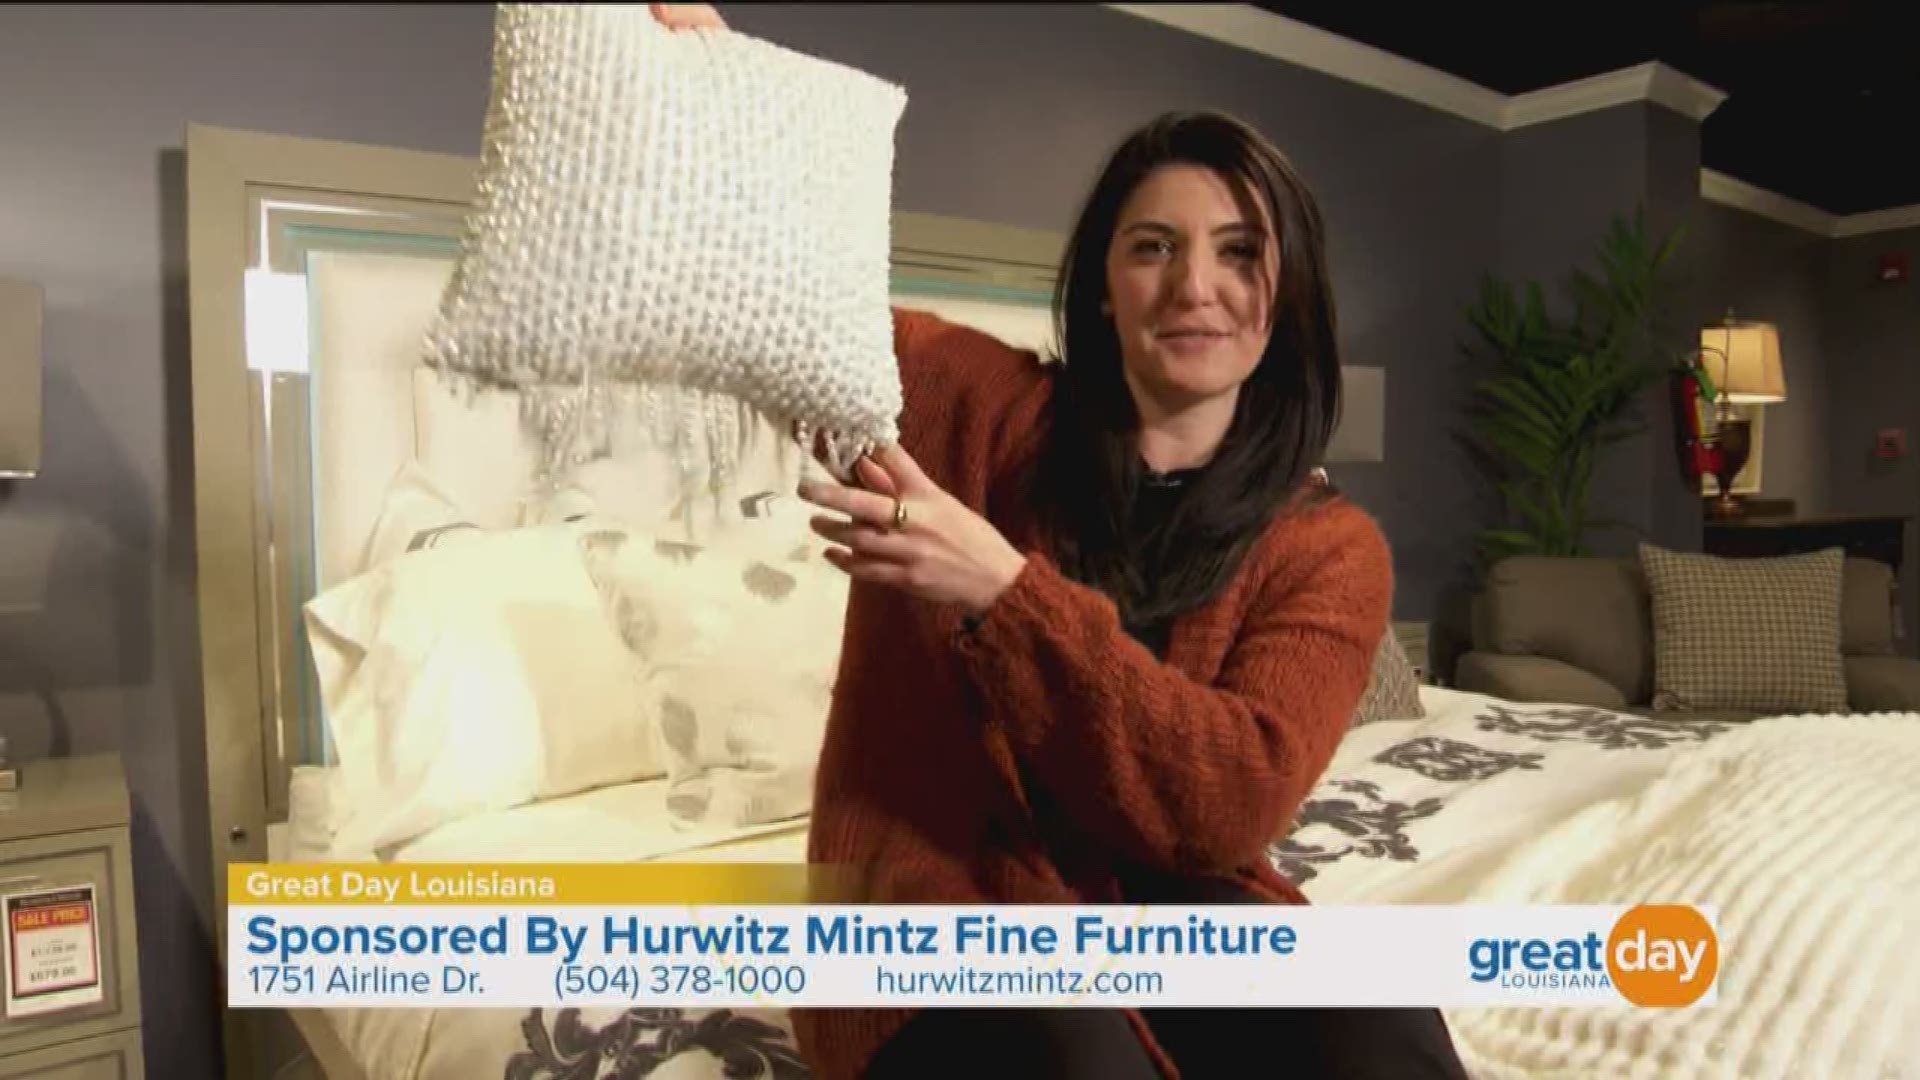 Jacqueline and Chef Kevin take a field trip to Hurwitz Mintz Fine Furniture & Interiors to see why they really do have something for everyone. Visit them in-person at 1751 Airline Dr to check out their massive selection or go online to www.hurwitzmintz.com.